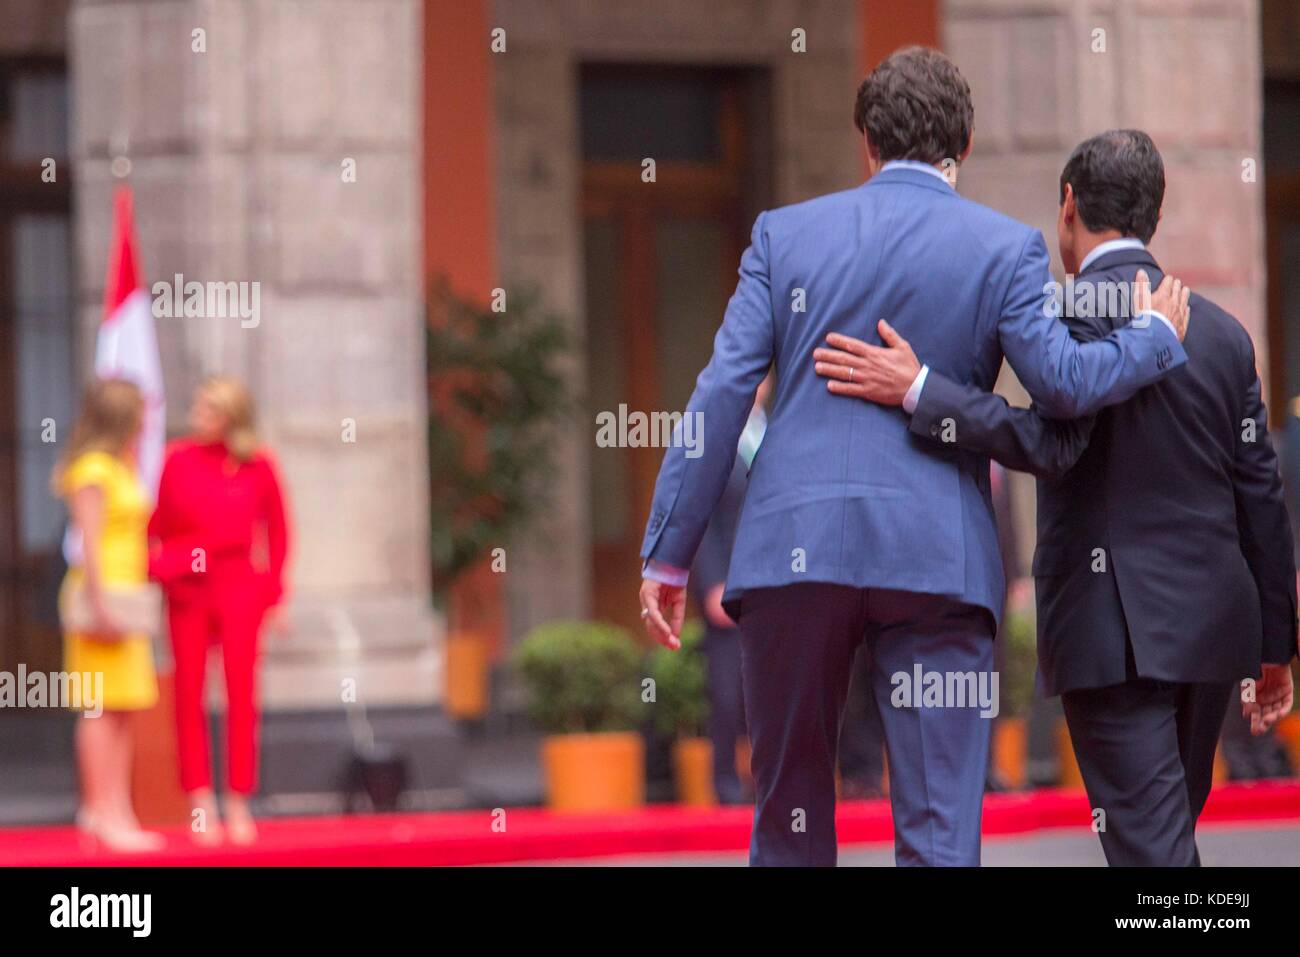 Canadian Prime Minister Justin Trudeau and Mexican President Enrique Pena Nieto walk together arm and arm following the formal arrival ceremony at Palacio Nacional October 12, 2017 in Mexico City, Mexico.   (presidenciamx via Planetpix) Stock Photo